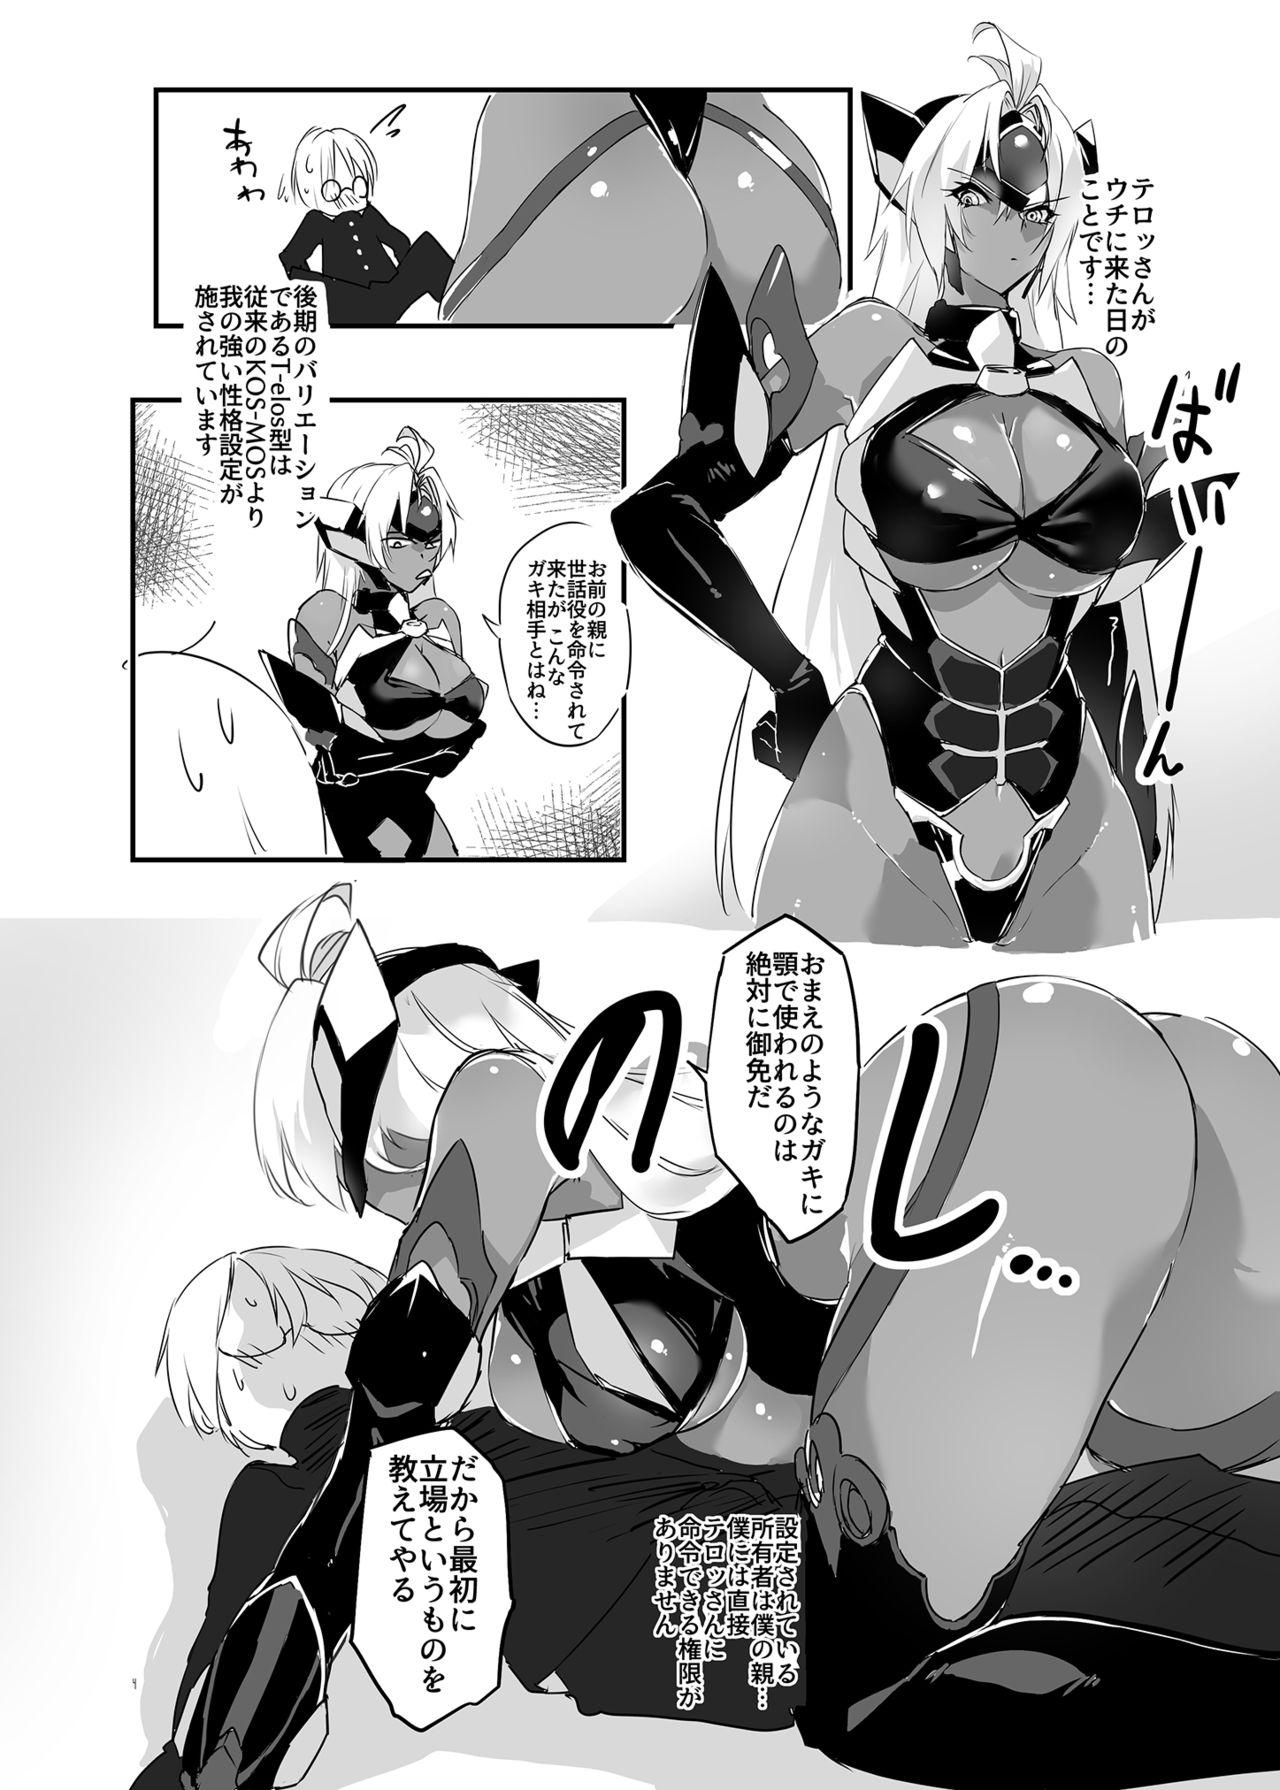 Sexteen hepatica5.0 - Xenosaga Pussy Play - Page 3